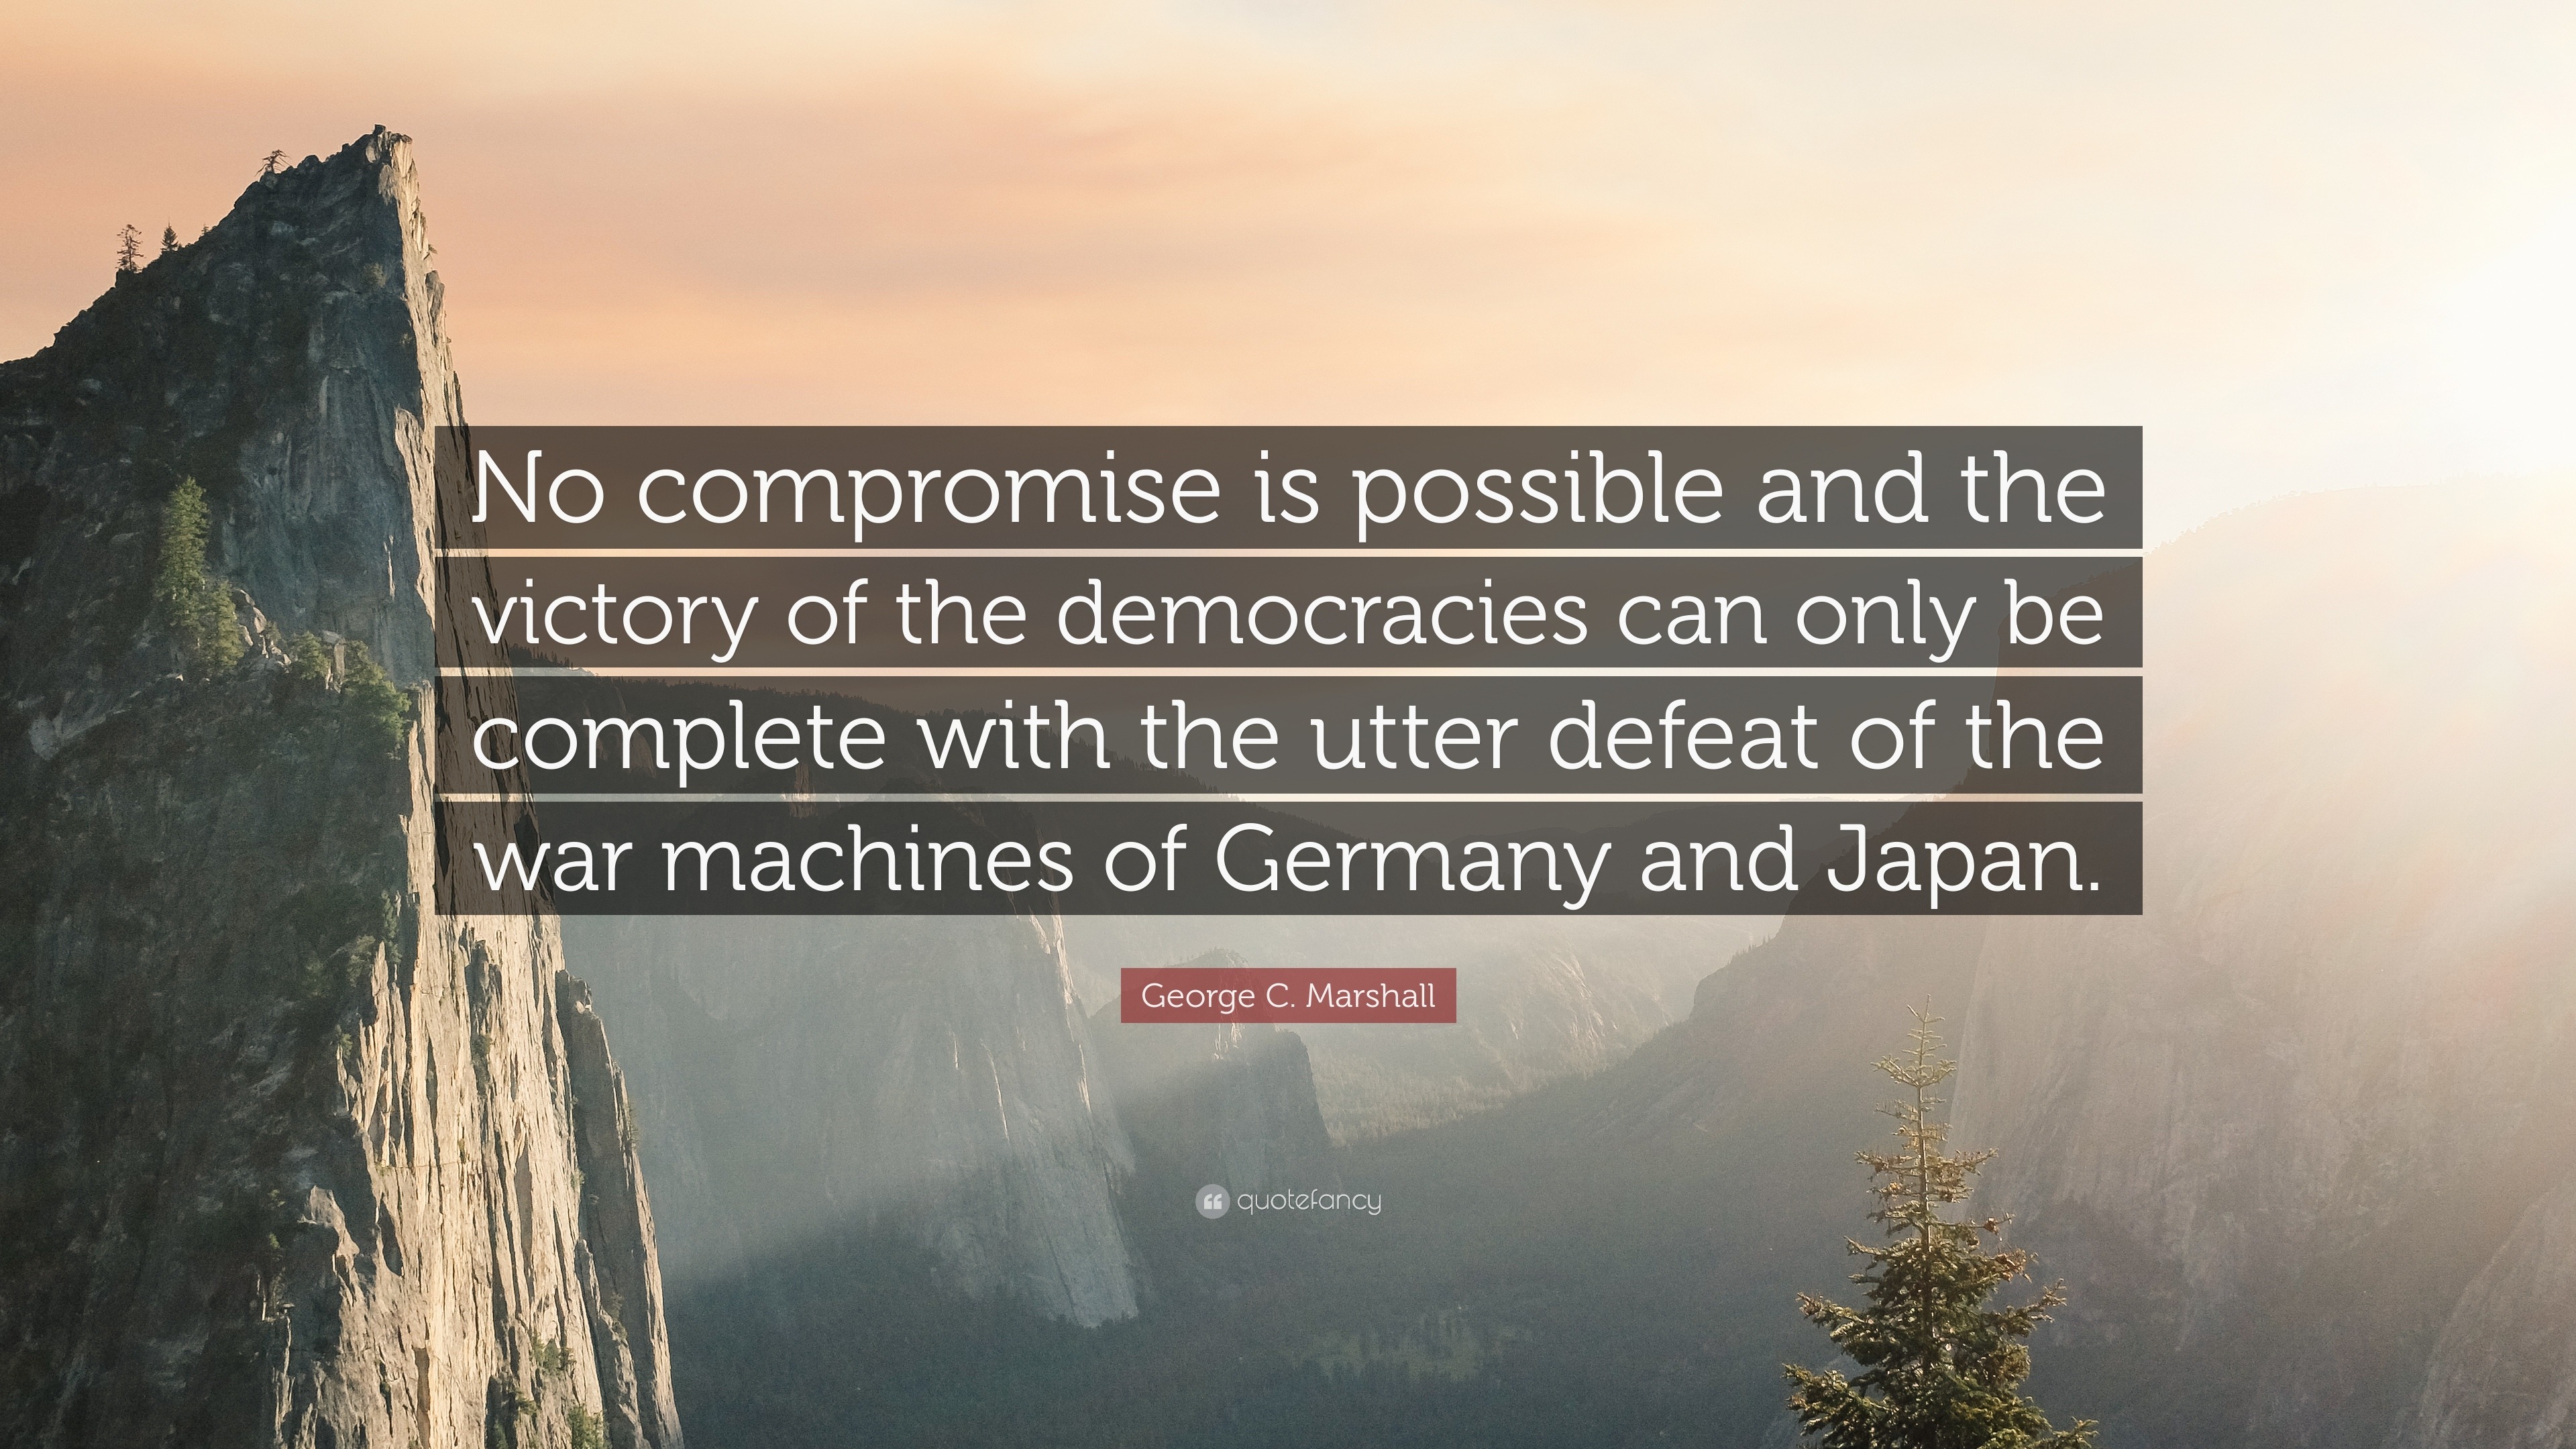 George C. Marshall Quote: “No compromise is possible and the victory of the  democracies can only be complete with the utter defeat of the war machi”